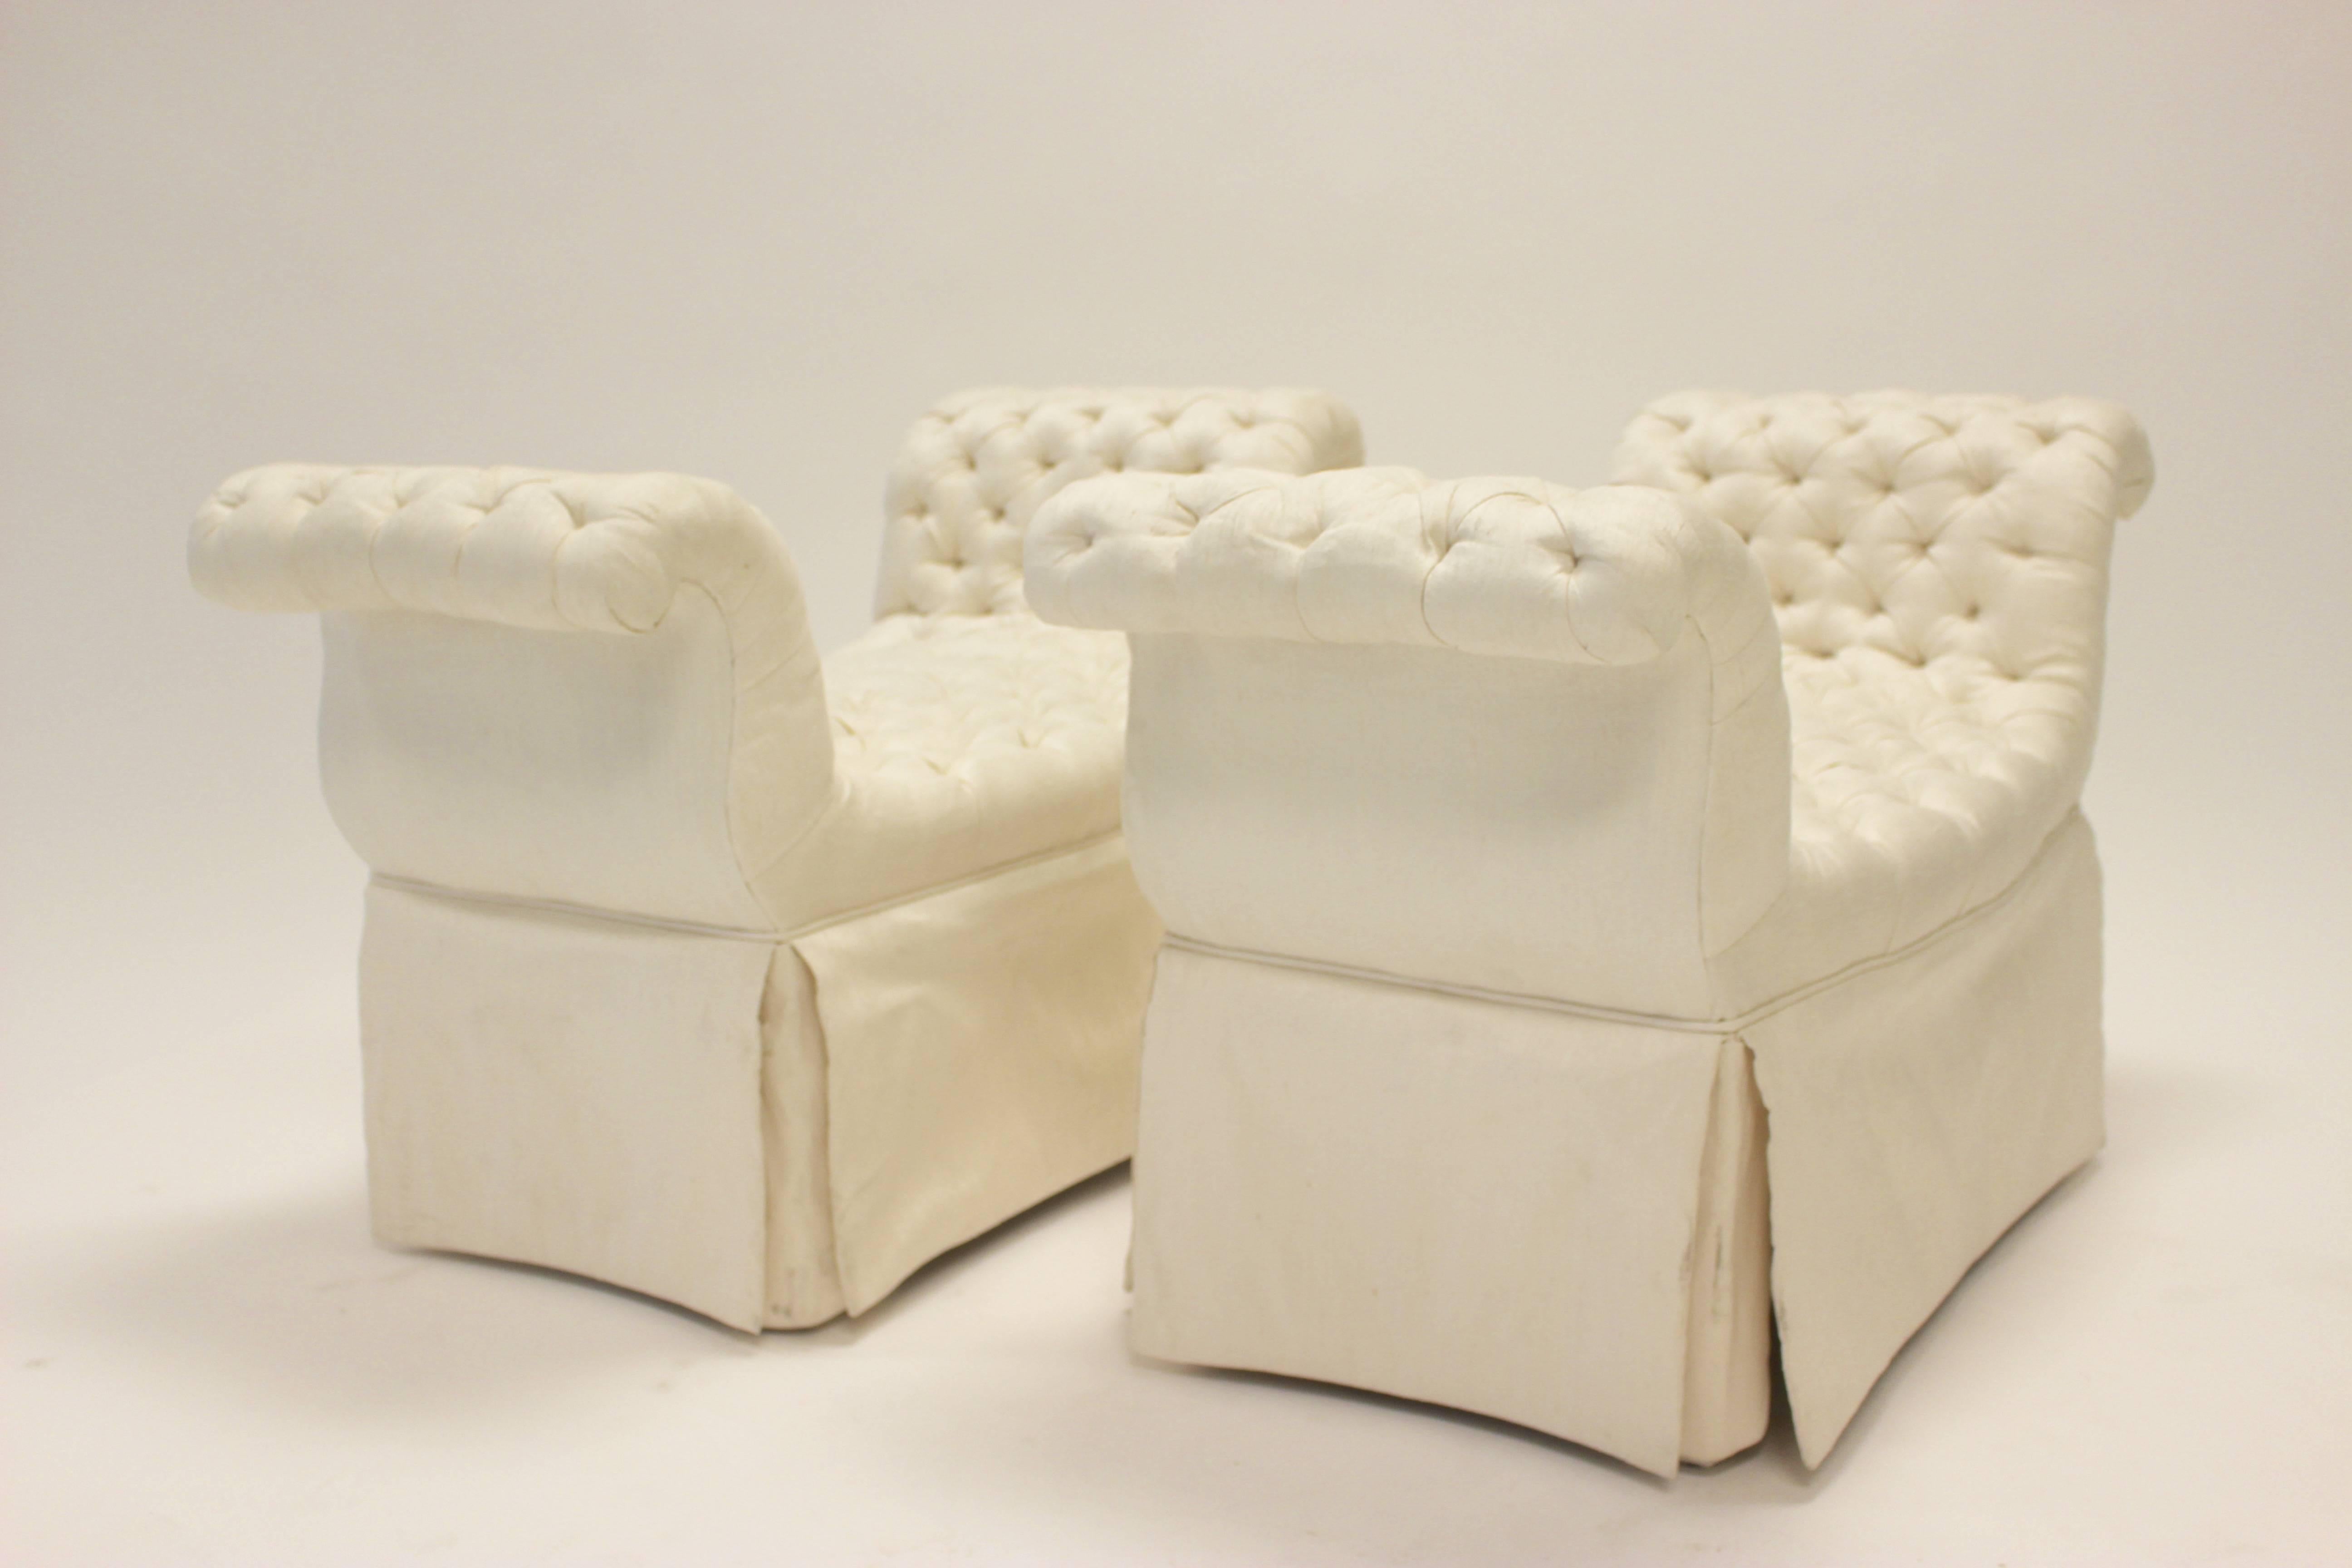 A pair of benches upholstered in cream-colored button-tufted silk from the 20th century. Each bench features a deep diamond button-tufted seat and rolled pleated side arms above a large skirt providing storage space. Possibly by the famous 20th